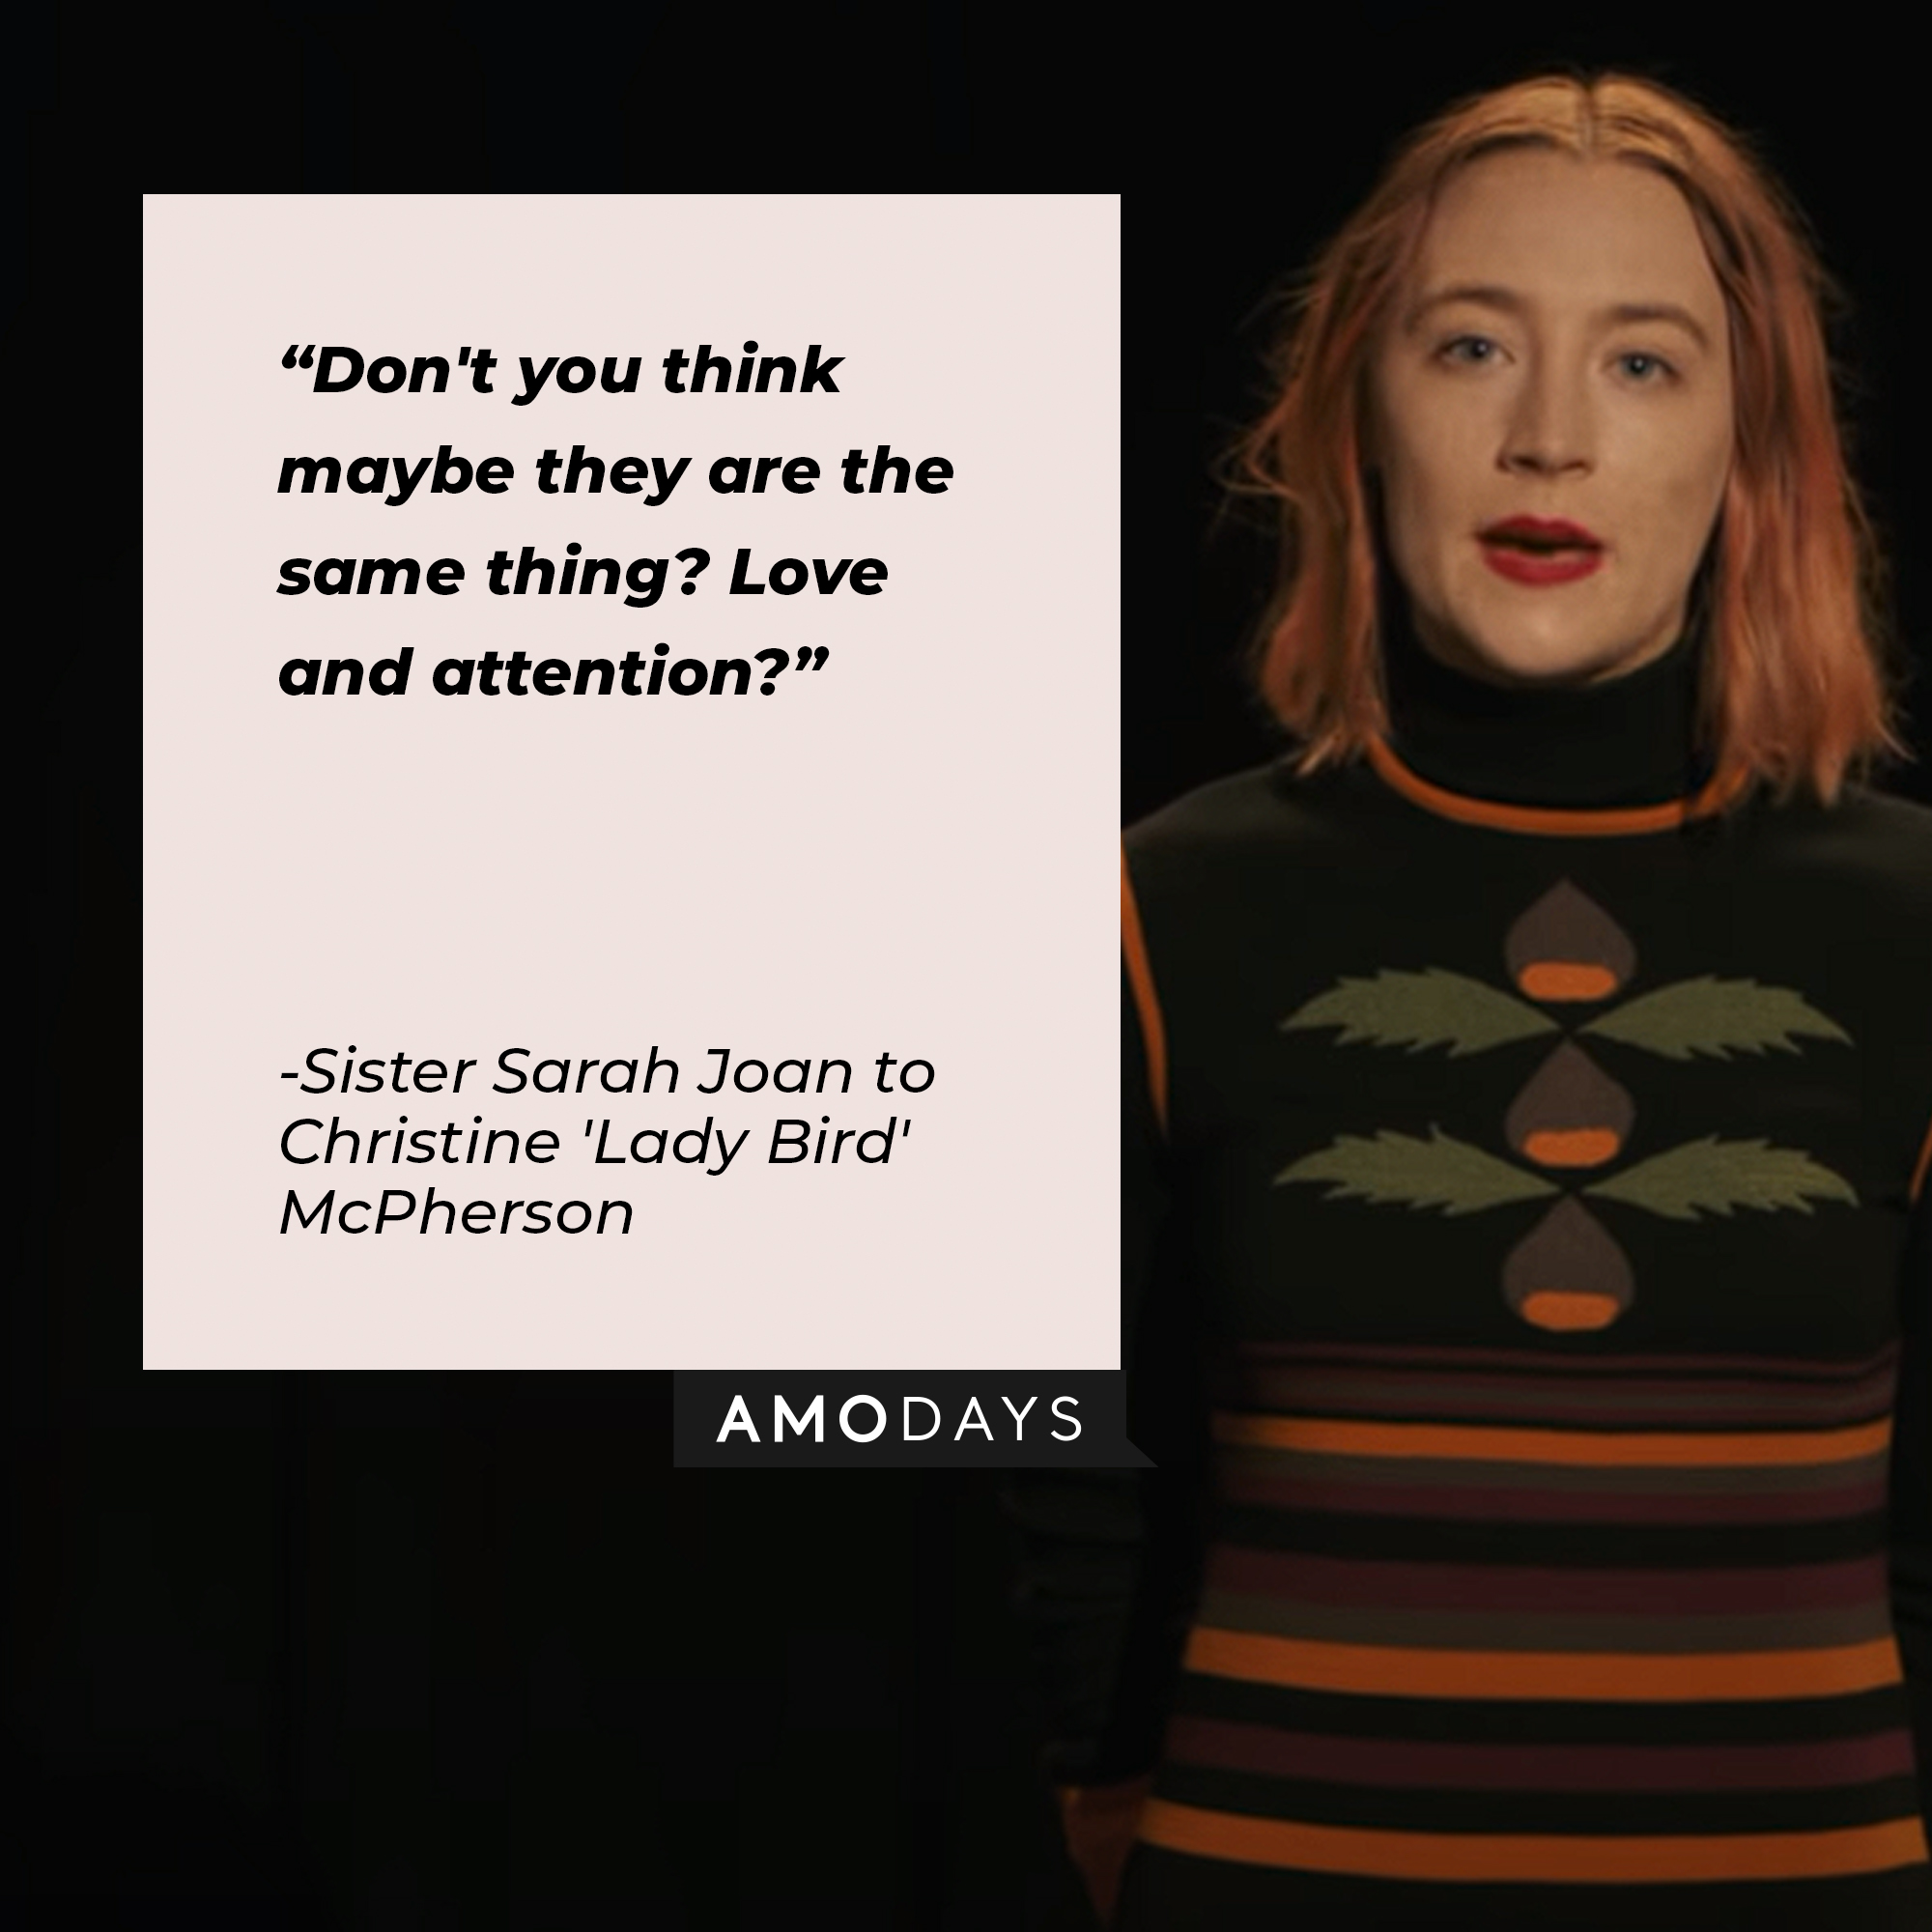 A quote from Sister Sarah Joan to Christine 'Lady Bird' McPherson: "Don't you think maybe they are the same thing? Love and attention?" | Source: youtube.com/A24